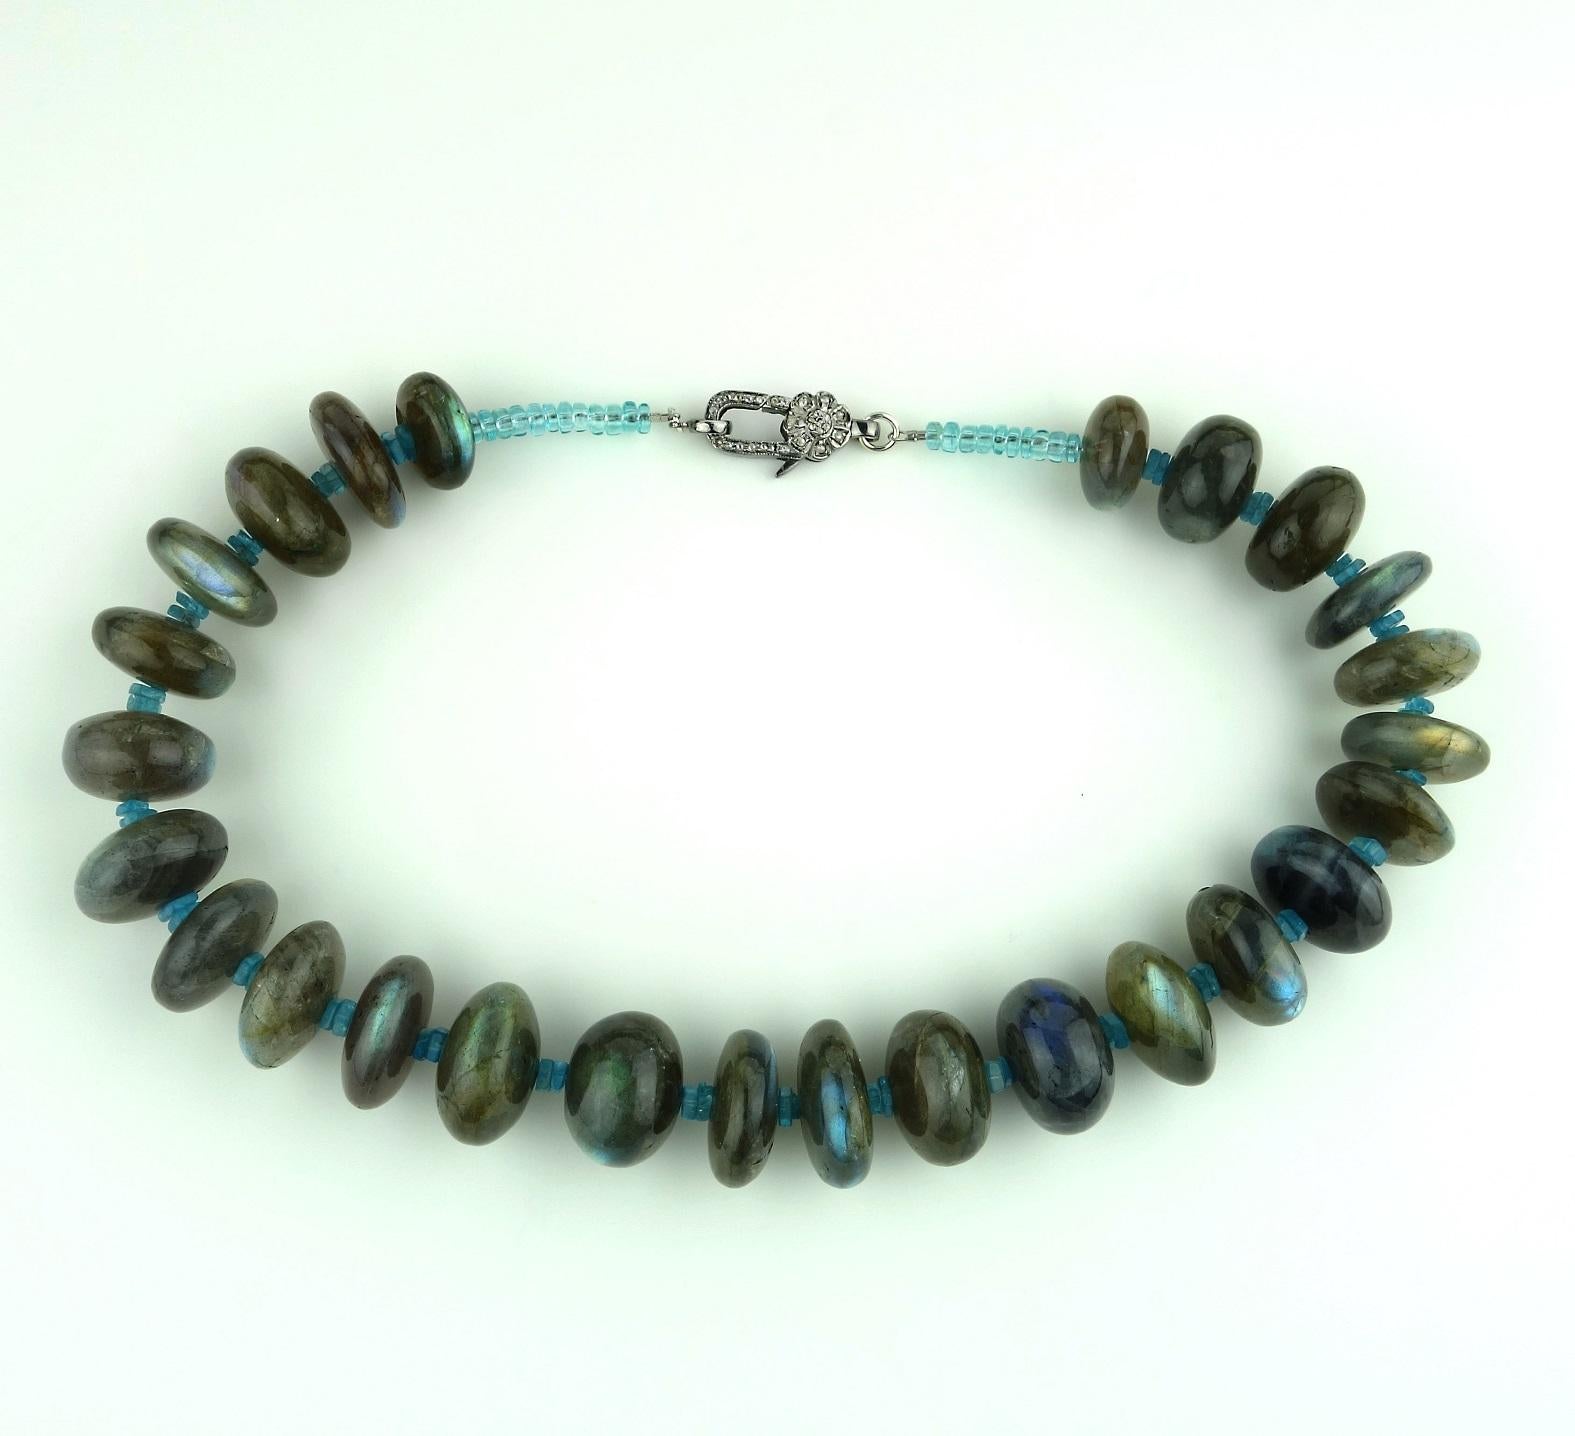 Statement 16 inch choker necklace of highly polished Labradorite rondelles accented with teal Apatite. These large, graduated, 16-21 MM, Labradorite rondelles are lovely shades of silver, gray, green, and blue.  The necklace is finished with an